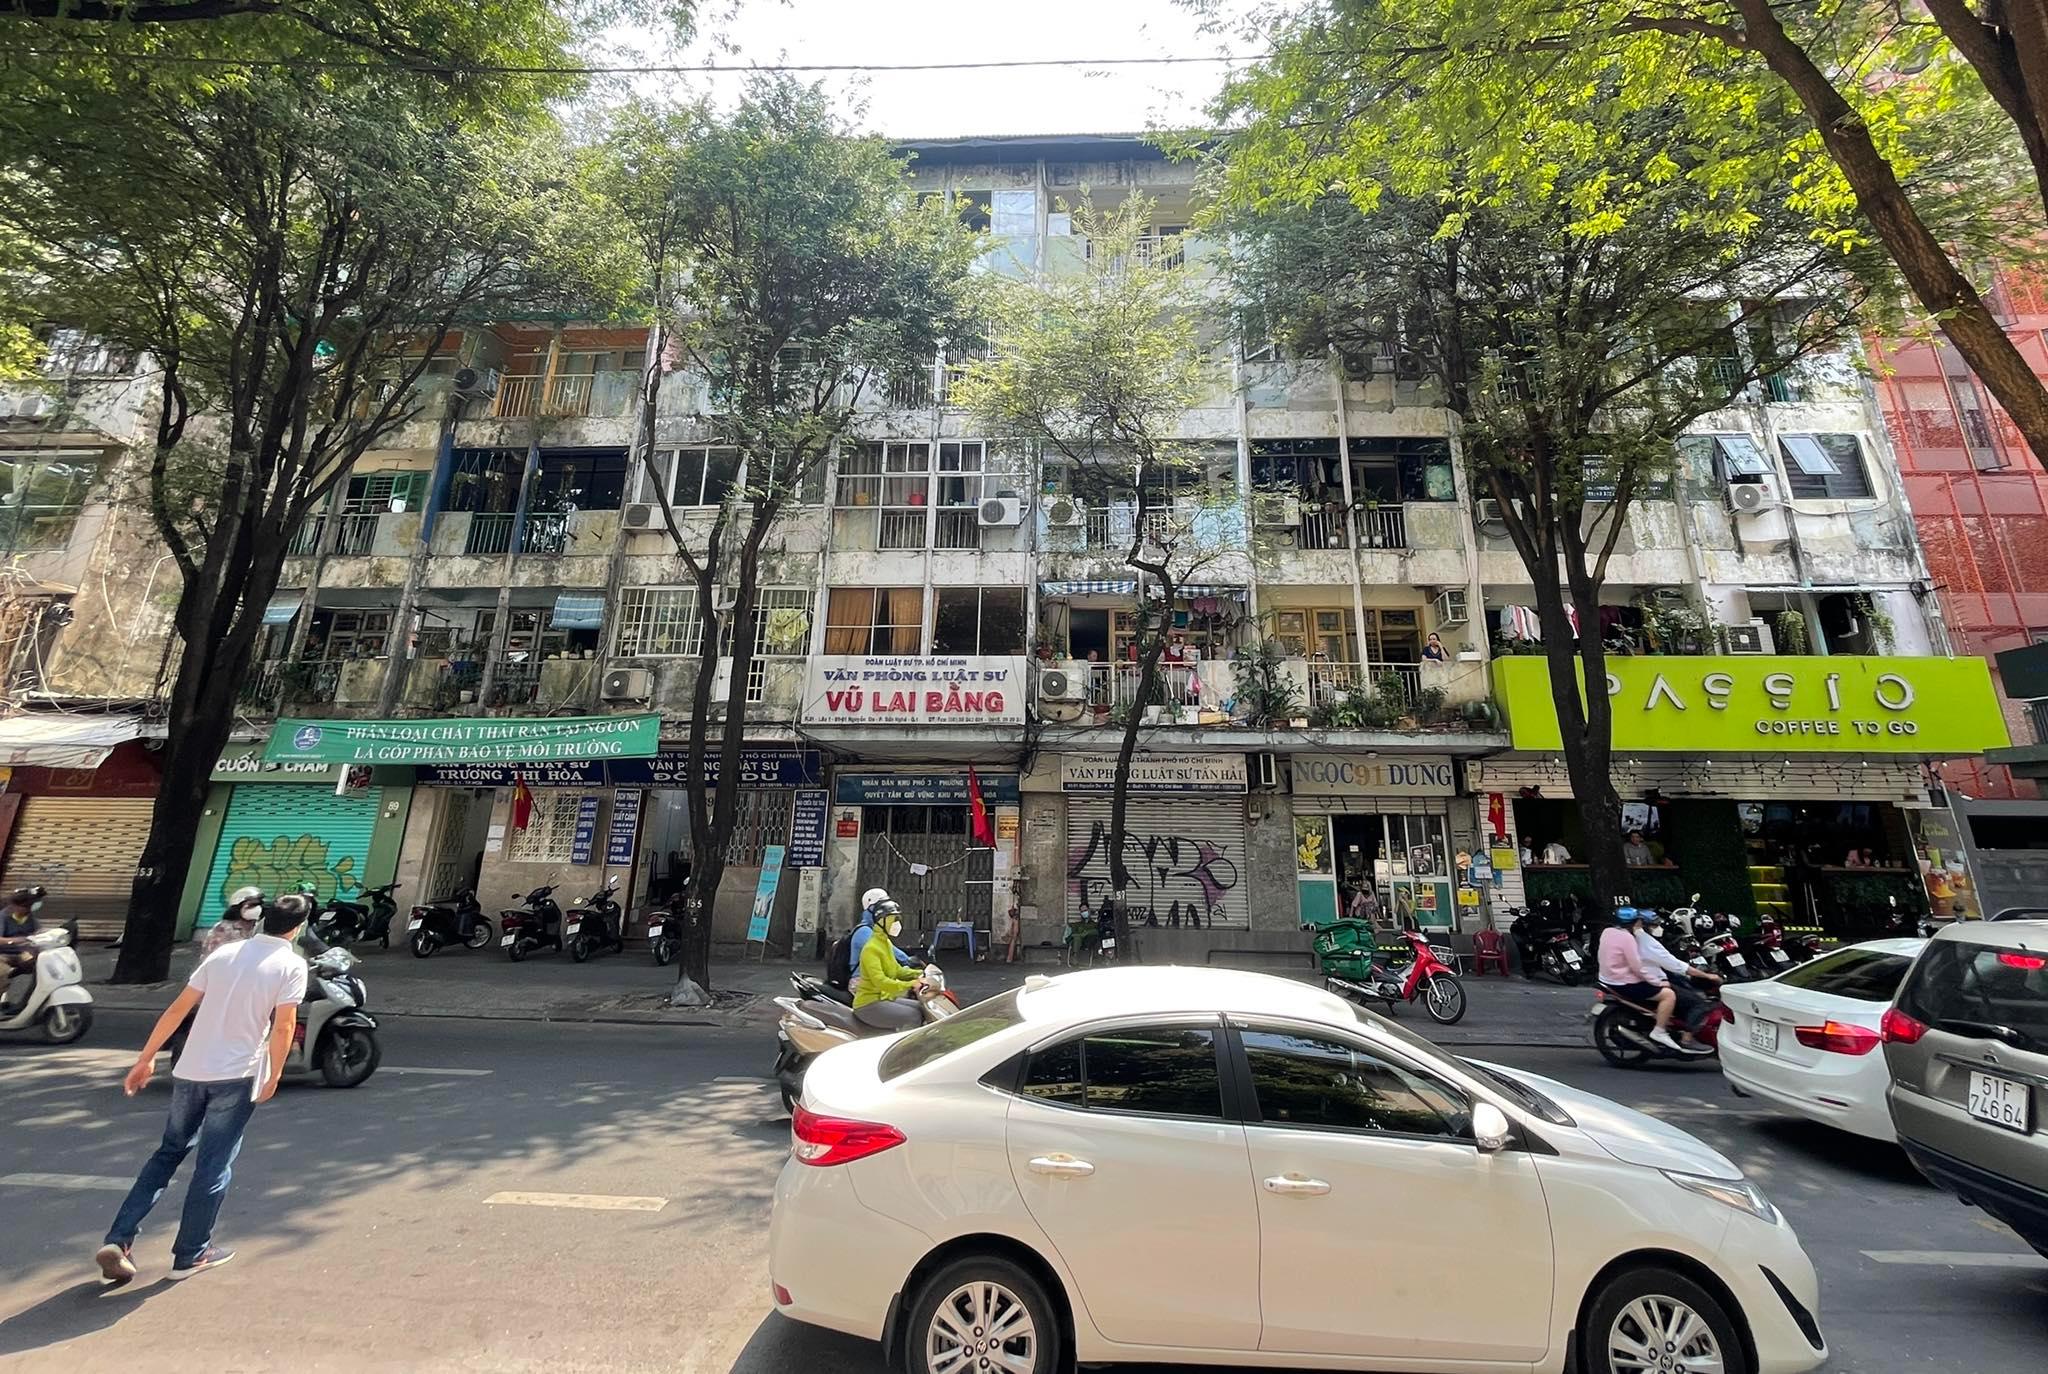 Saigon removes hour-long lockdown order at downtown condo building over new COVID-19 cluster